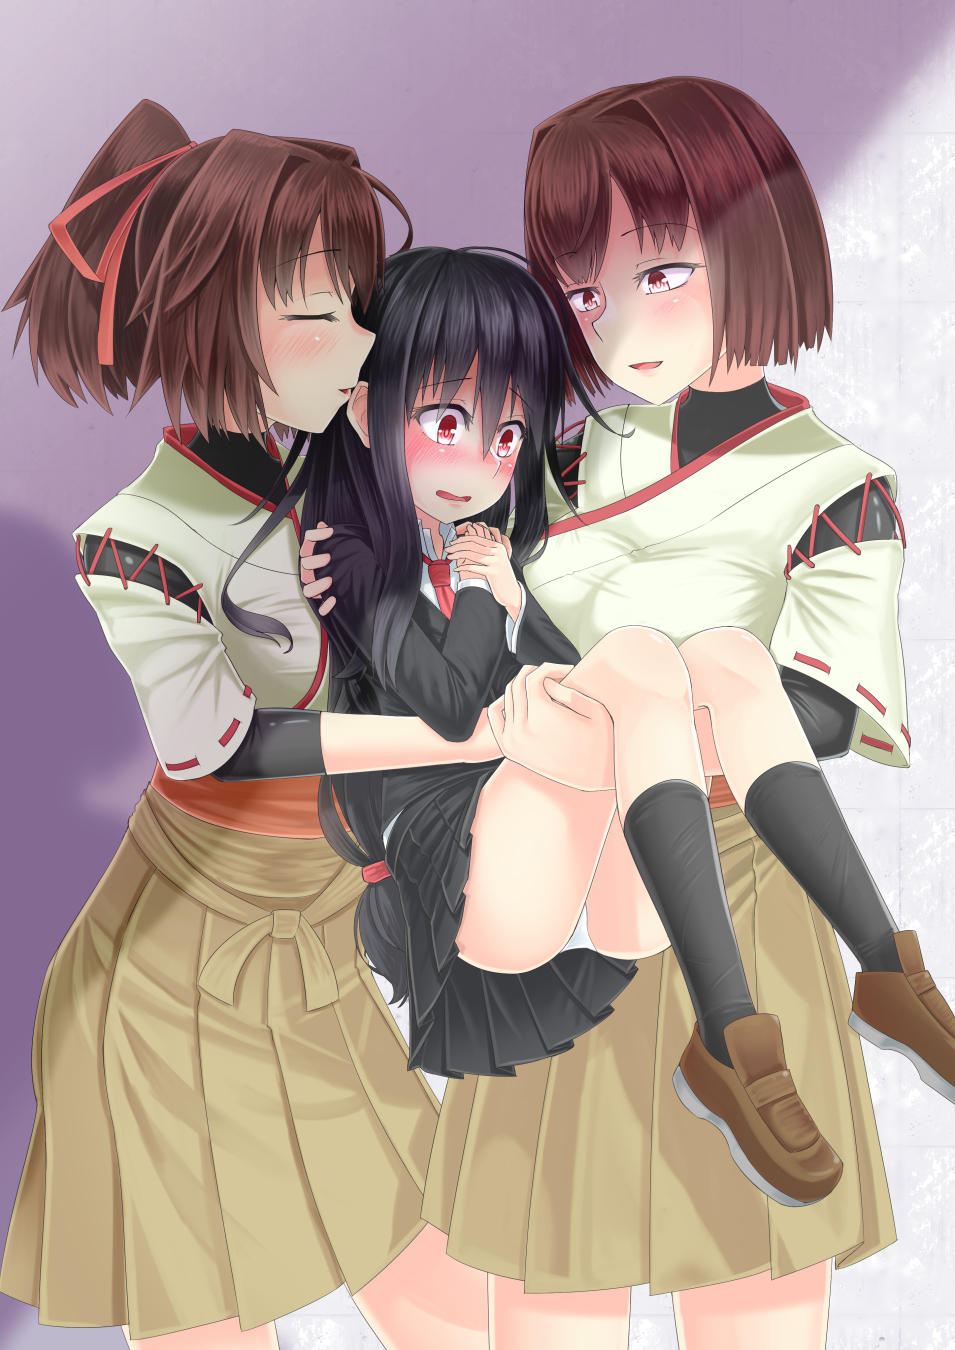 3girls black_hair blush brown_hair carrying closed_eyes commentary_request girl_sandwich hatsushimo_(kantai_collection) highres hyuuga_(kantai_collection) incipient_kiss ise_(kantai_collection) kantai_collection multiple_girls open_mouth panties pantyshot princess_carry red_eyes sandwiched short_hair skirt underwear yuri zaki_(2872849)